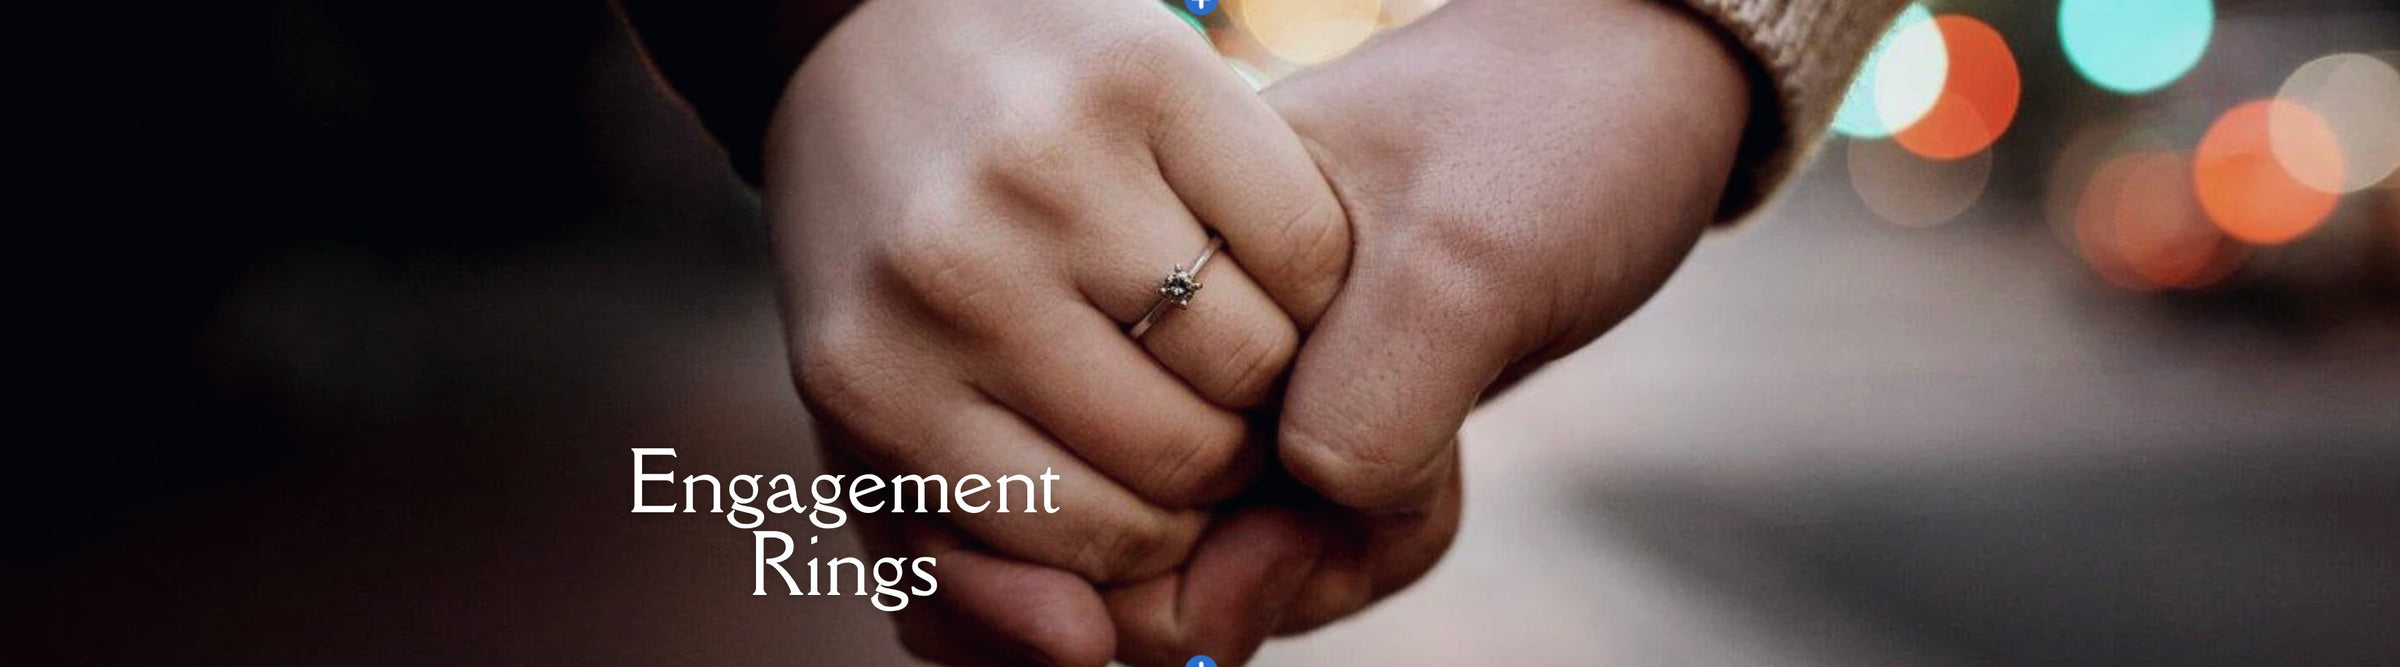 engagement rings banner image